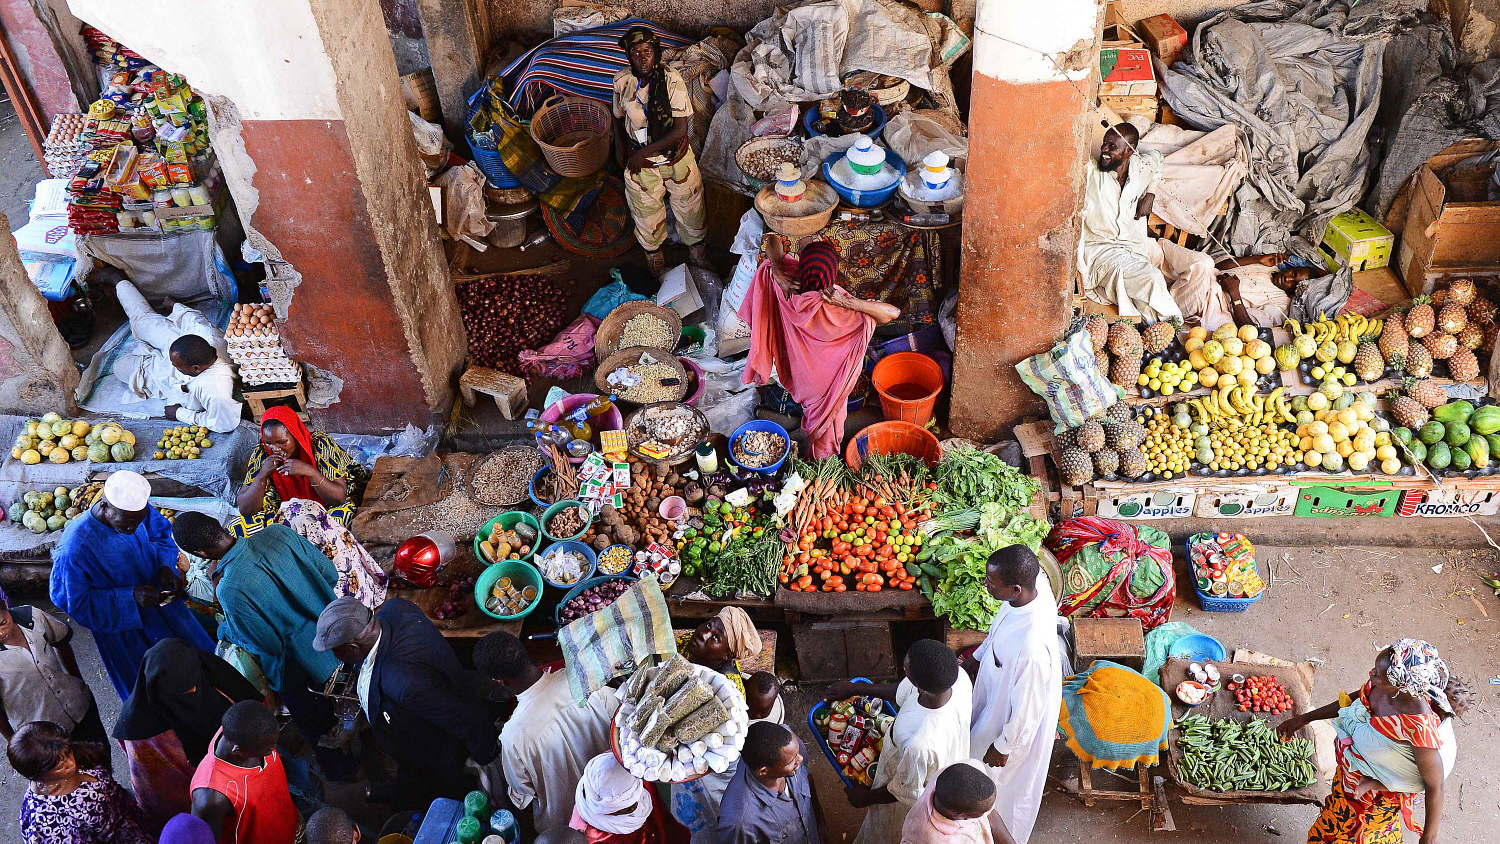 Njemena, Chad - Vendors selling vegetables at the central market